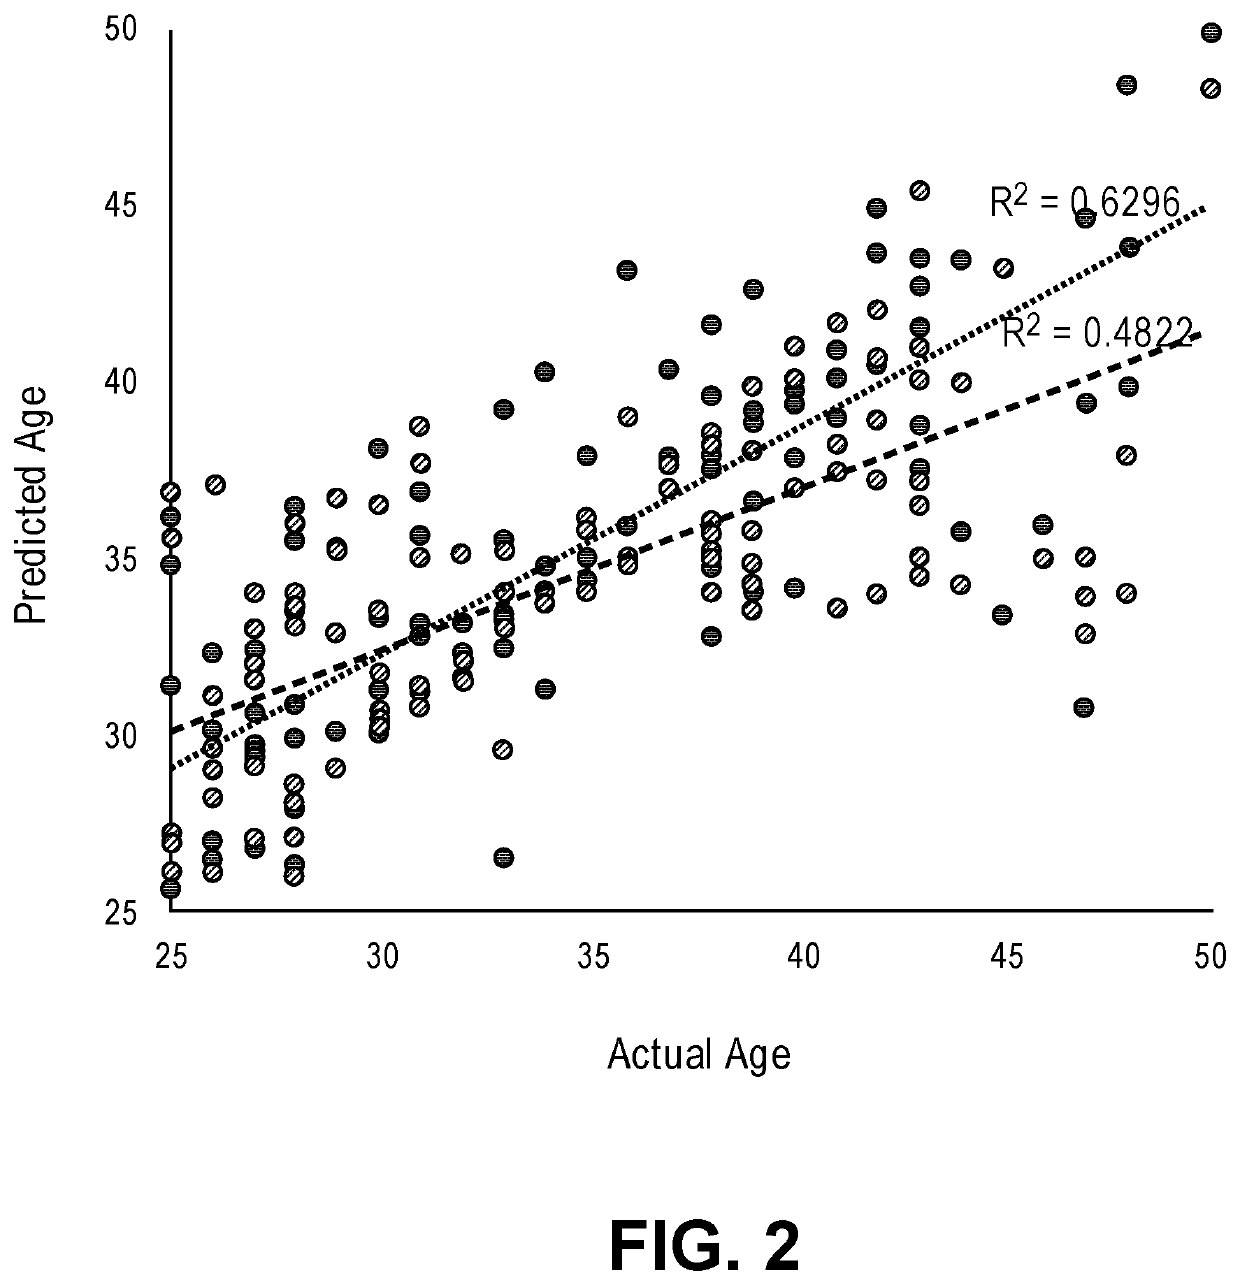 Predicting skin age based on the analysis of skin flora and lifestyle data